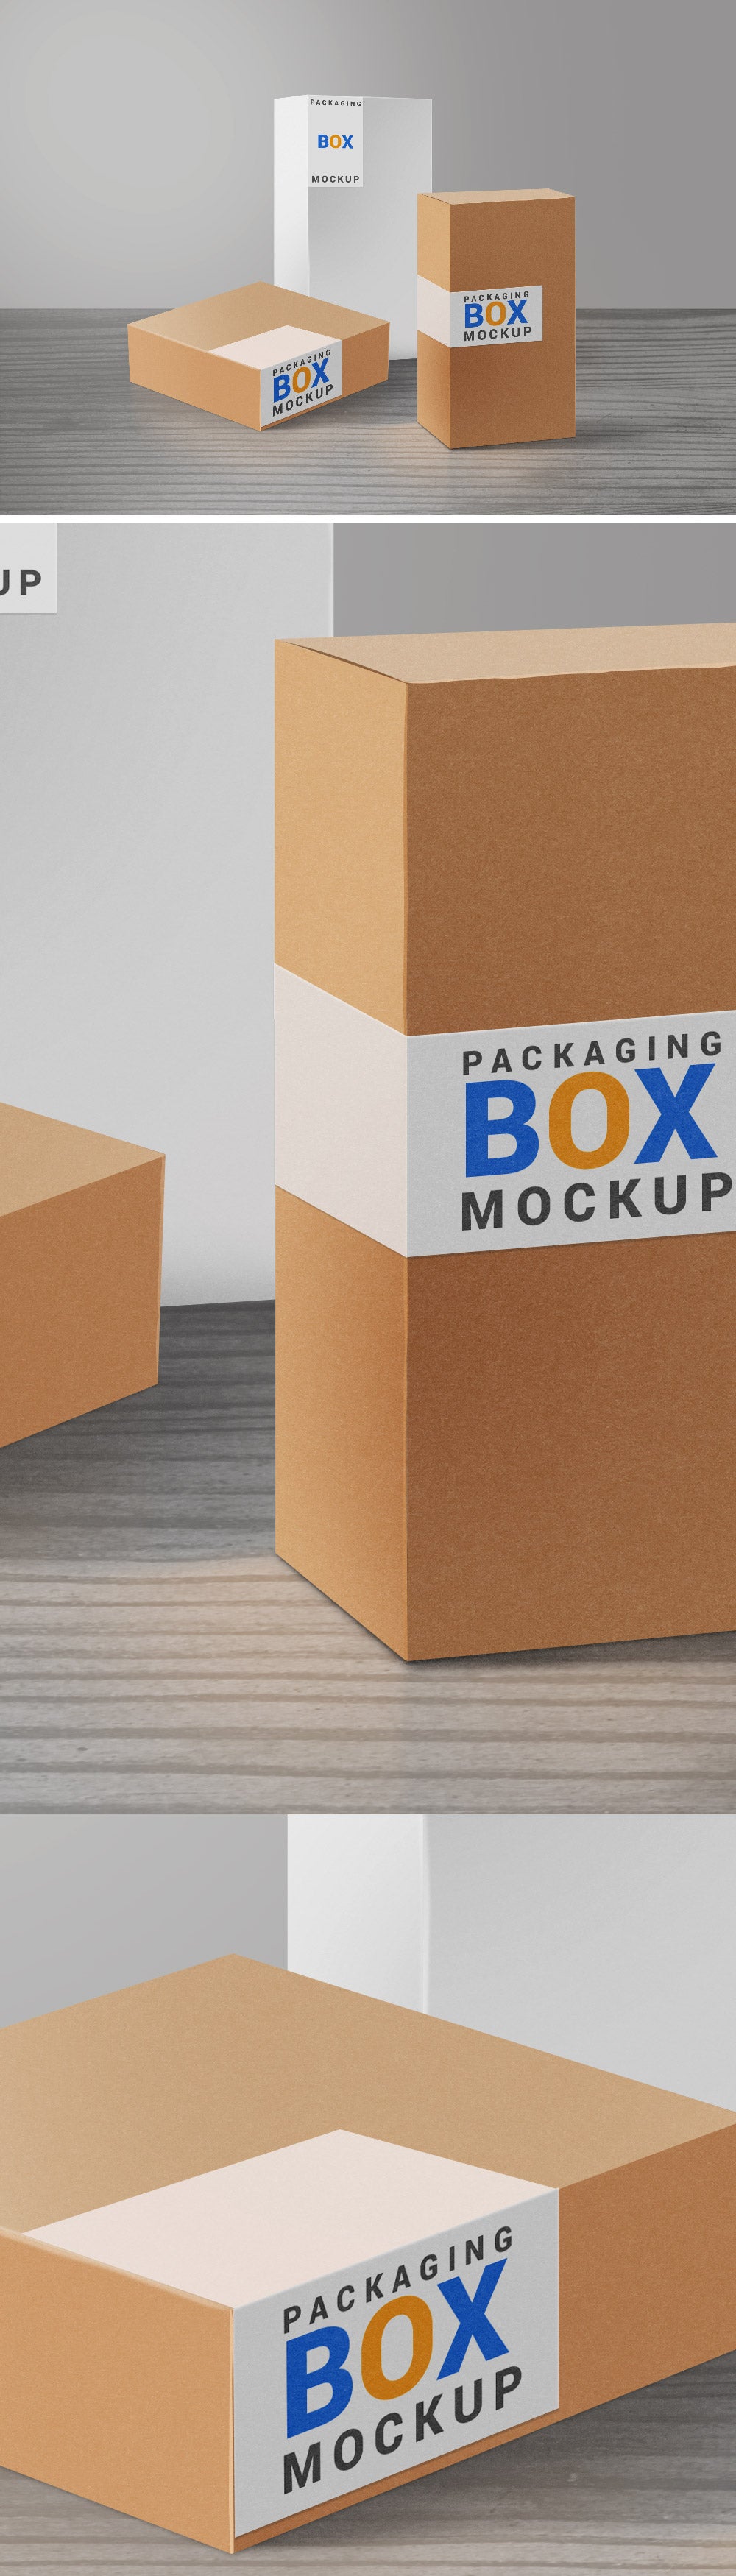 Free Product Packaging Boxes PSD Mockup